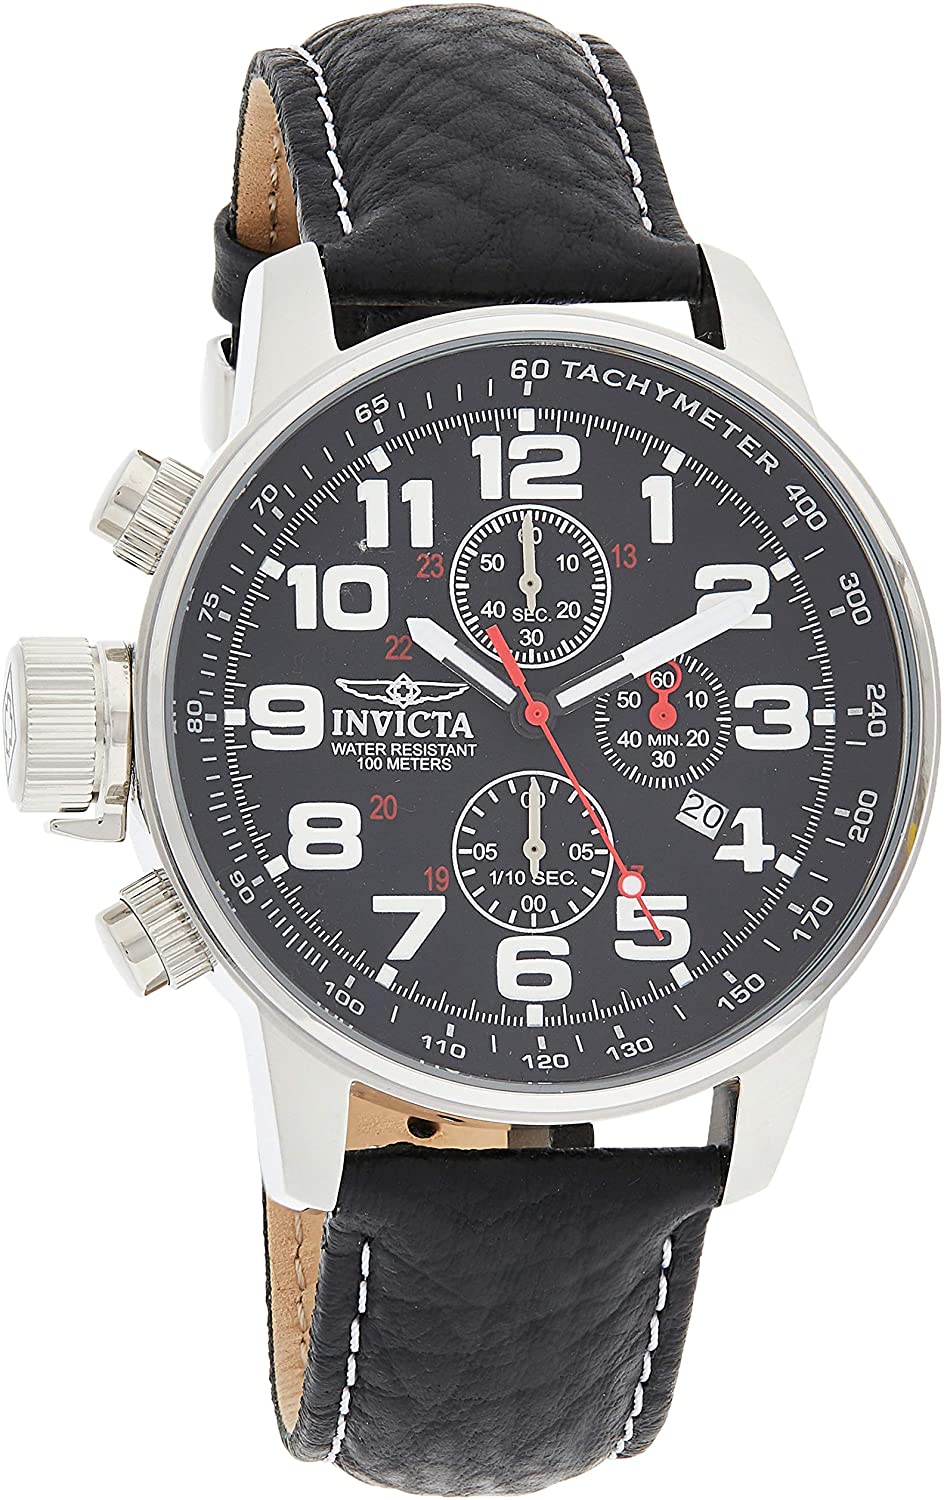 Invicta Men's Force Stainless Steel Japanese-Quartz Watch with Leather-Pig-Skin Strap, Black, 22 (Model: 2770)